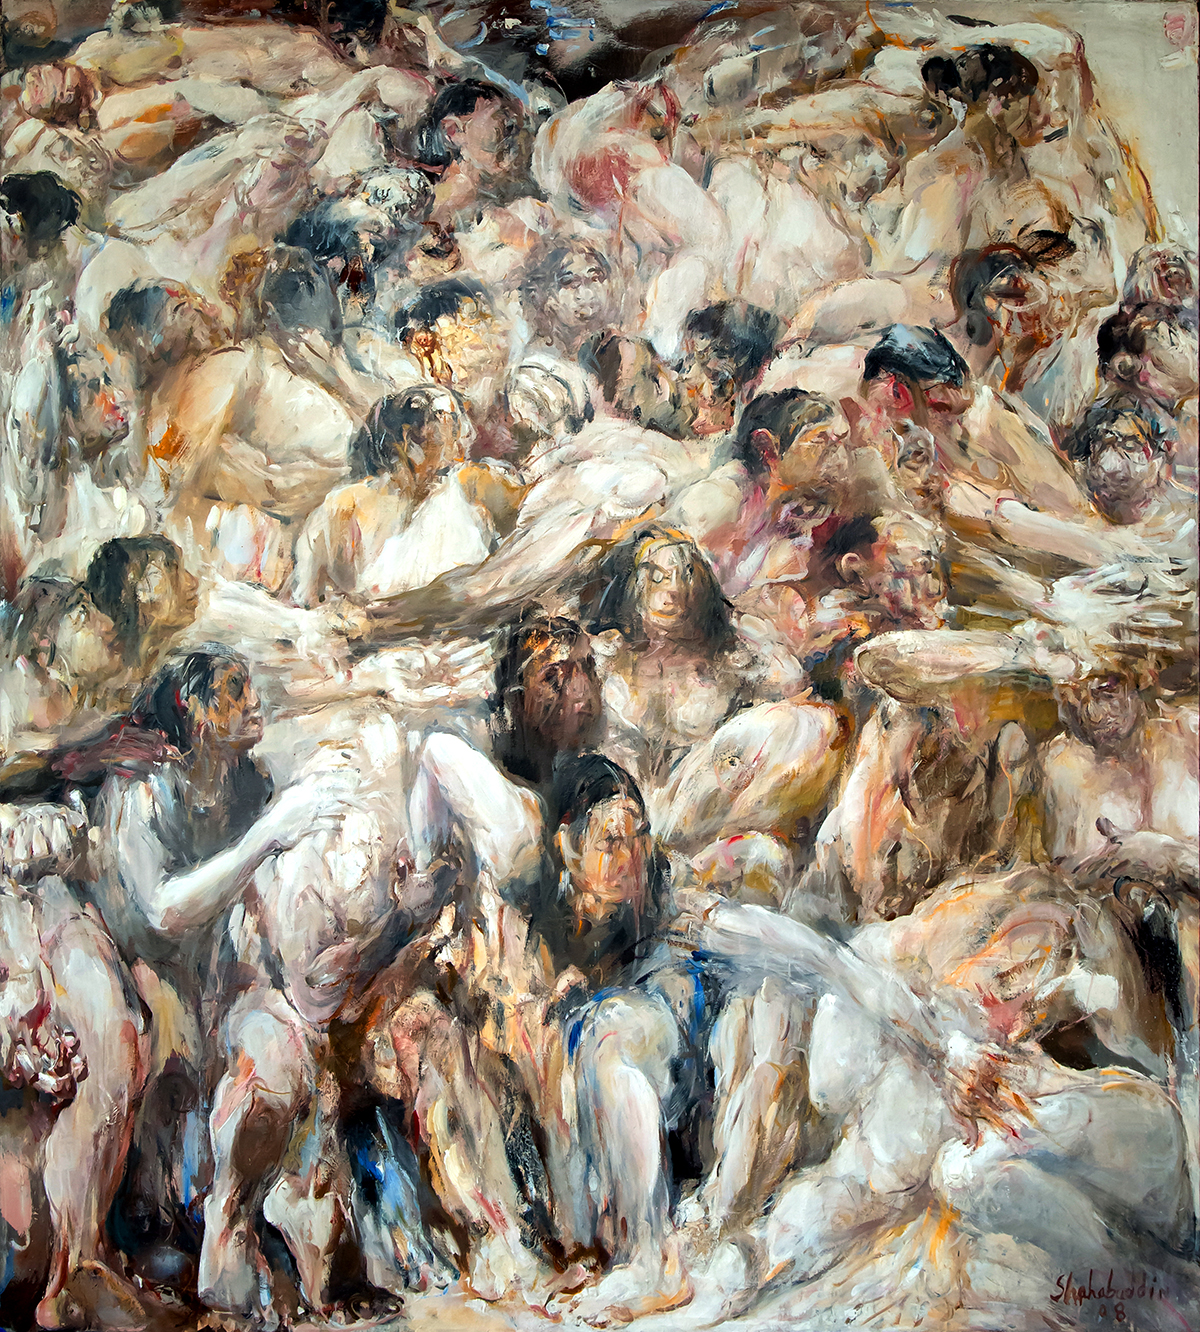 A painting of lots of people huddled together